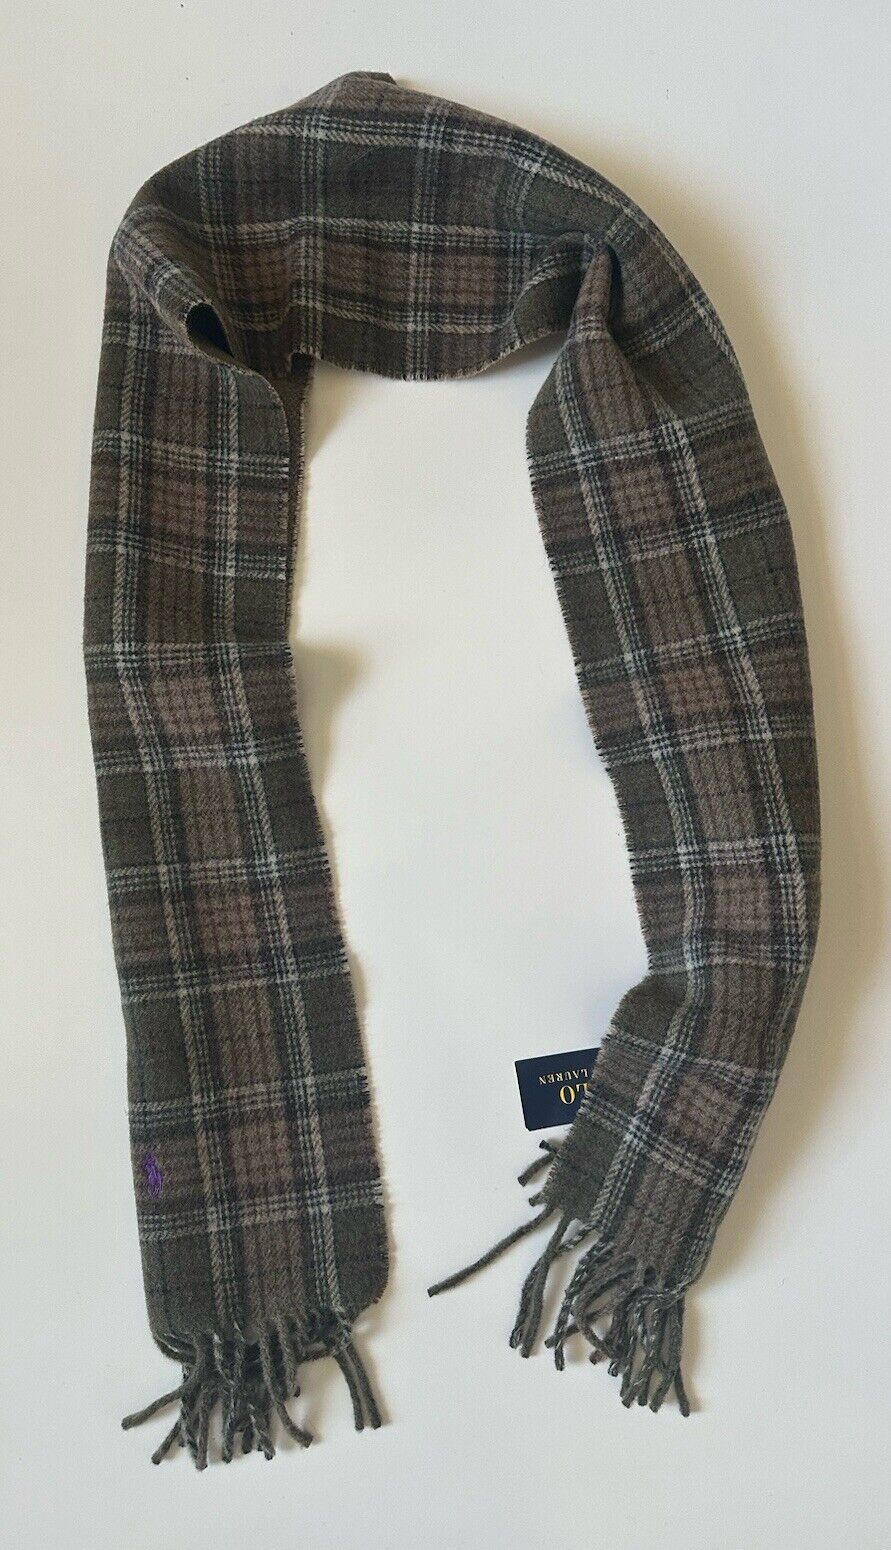 NWT $75 Polo Ralph Lauren Wool Scarf 168cmx25cm Made in Italy